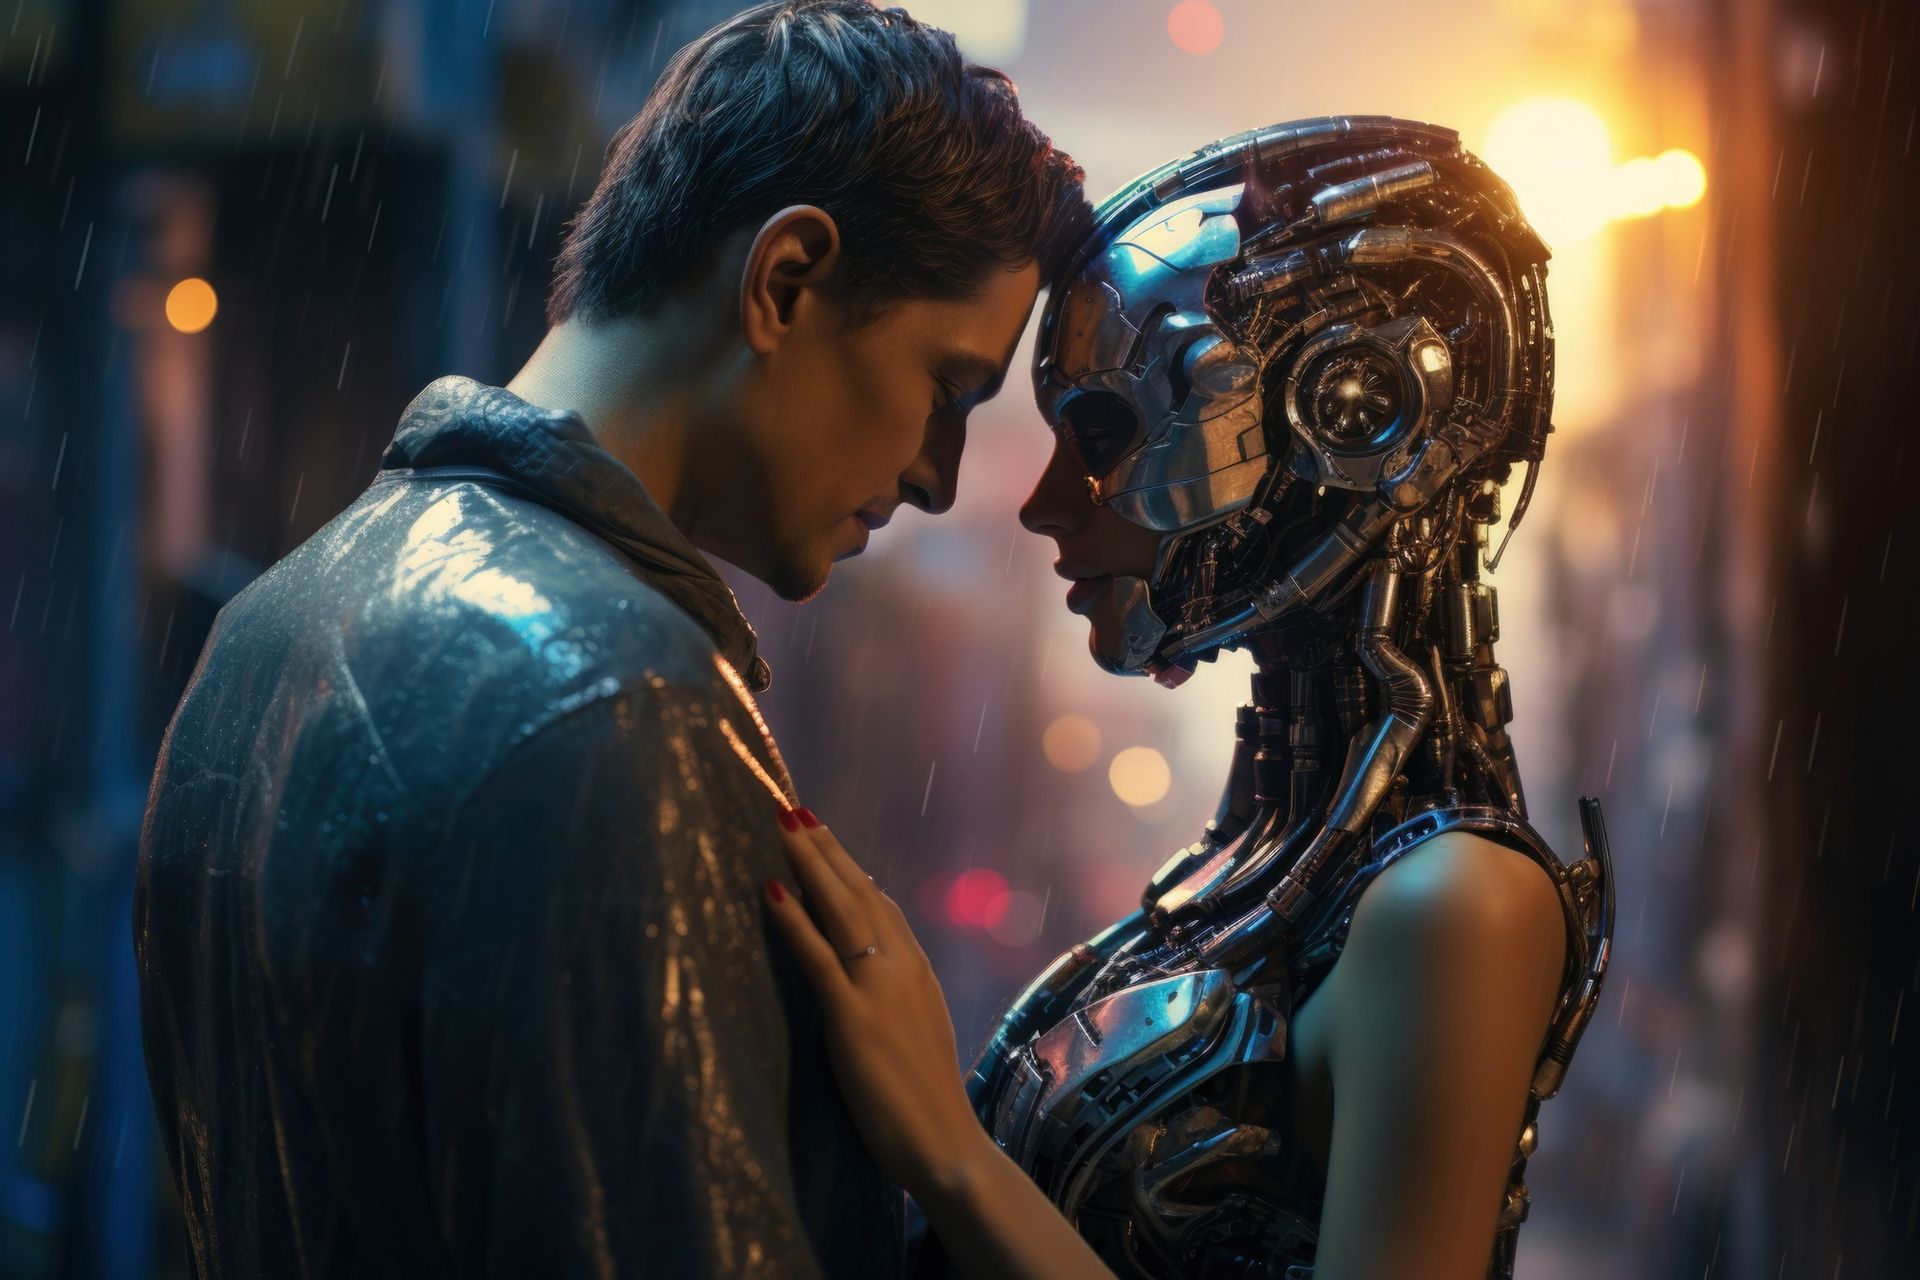 AI girlfriend bots are exploding - here's why